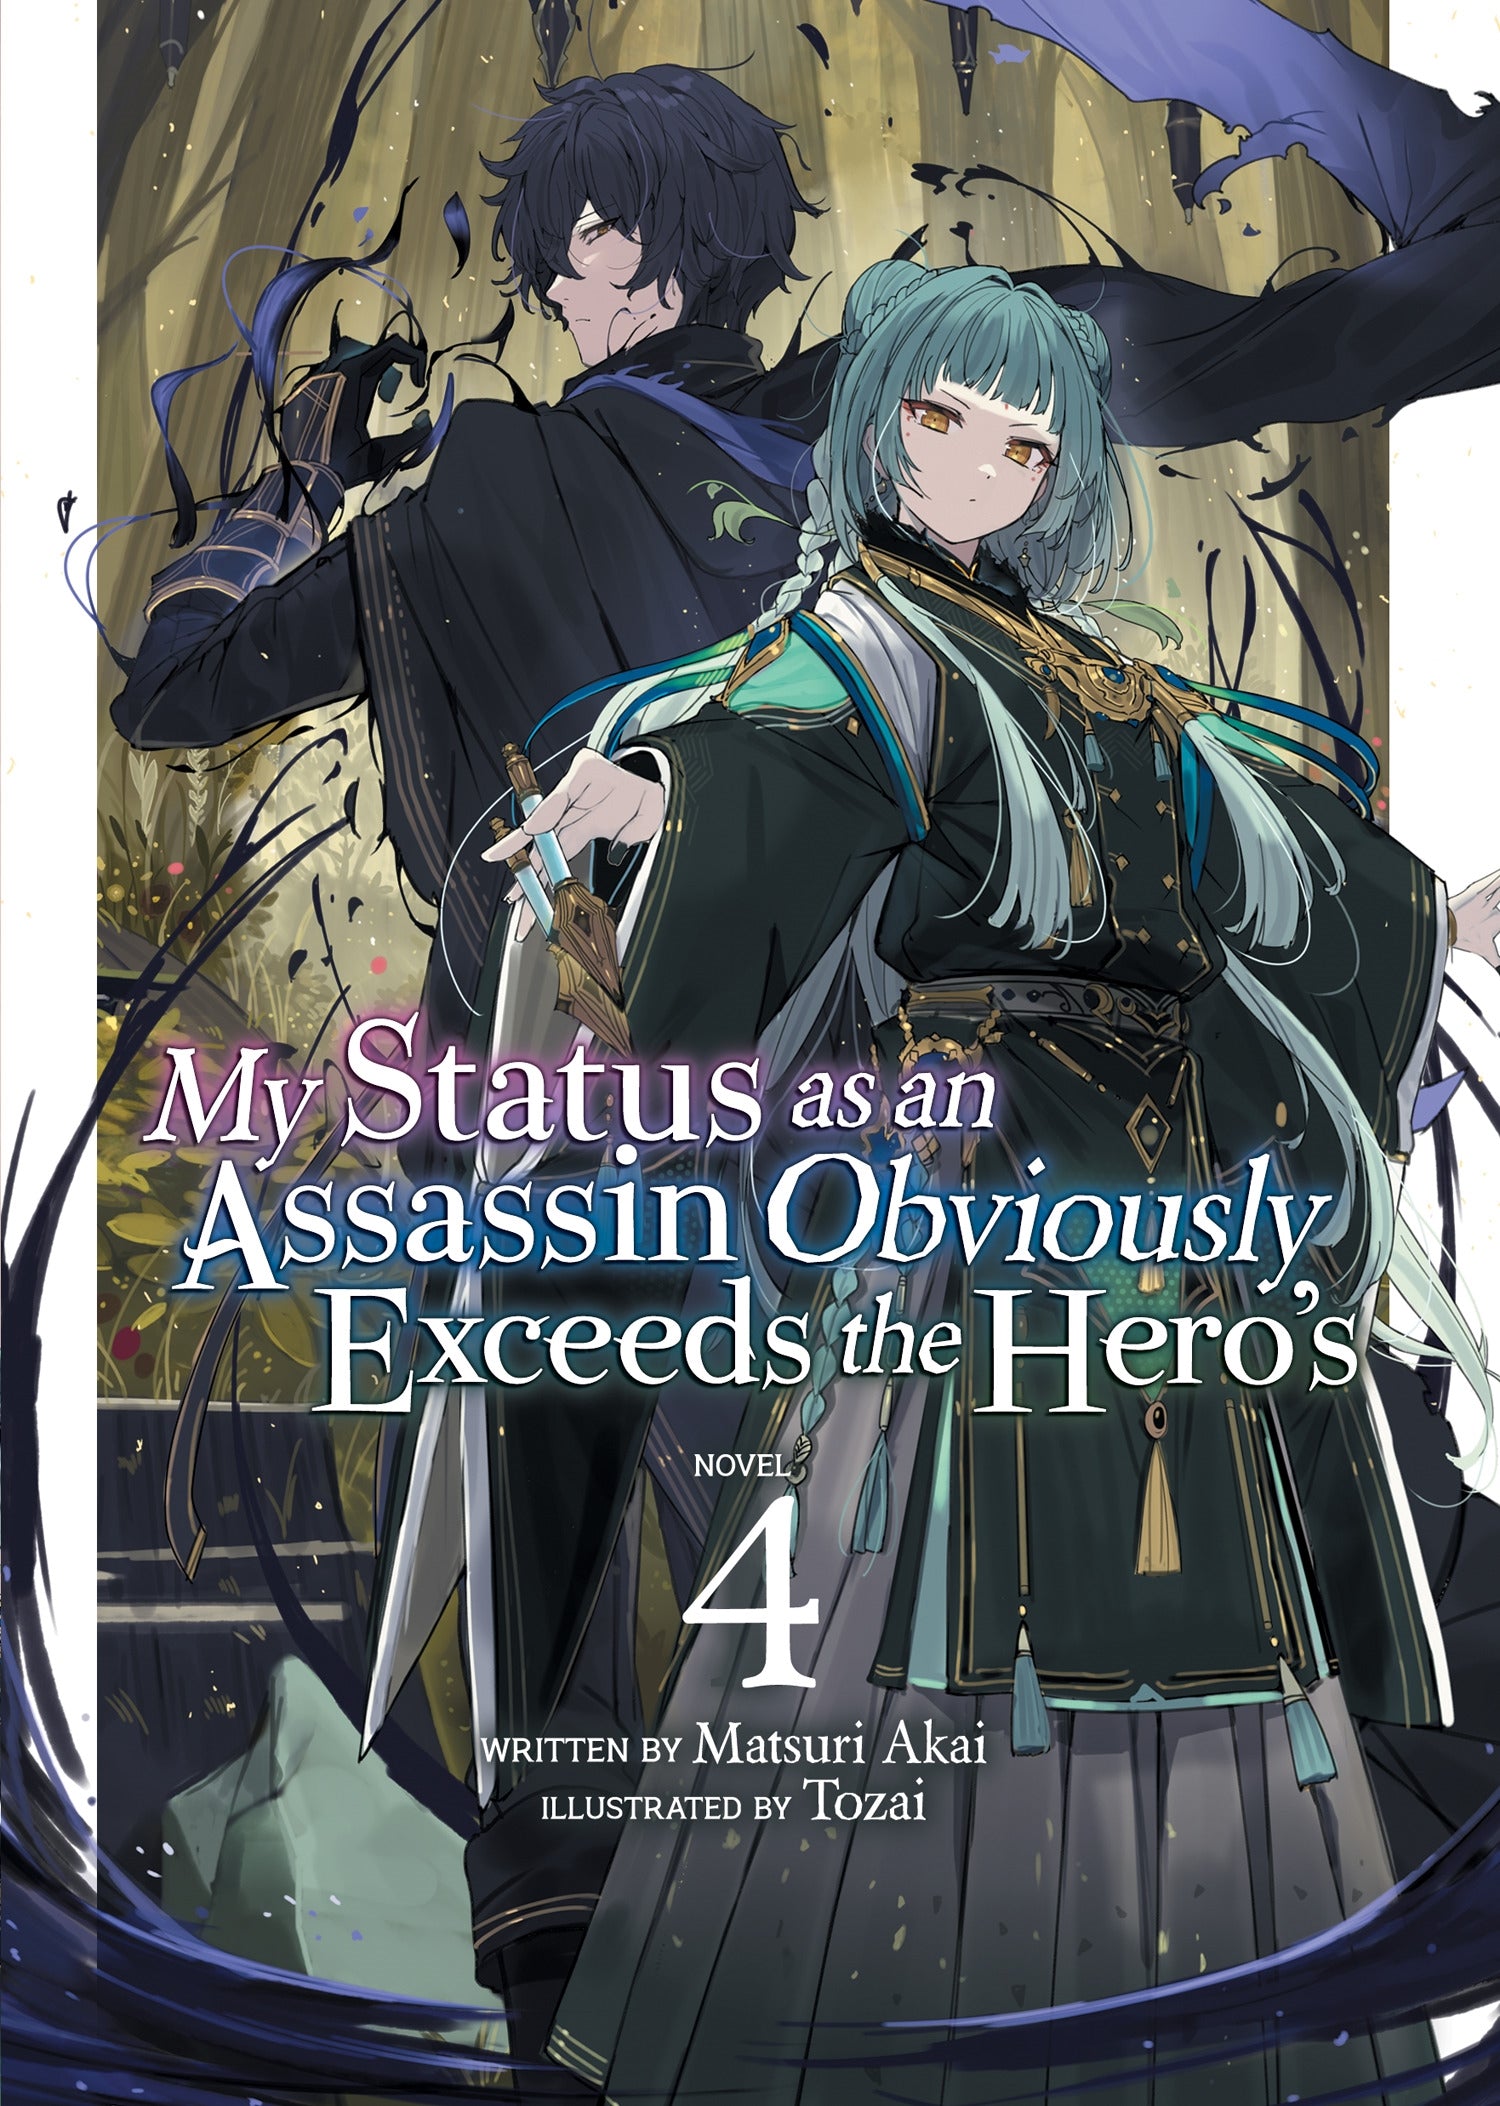 My Status as an Assassin Obviously Exceeds the Hero's [Light Novel] Vol. 4